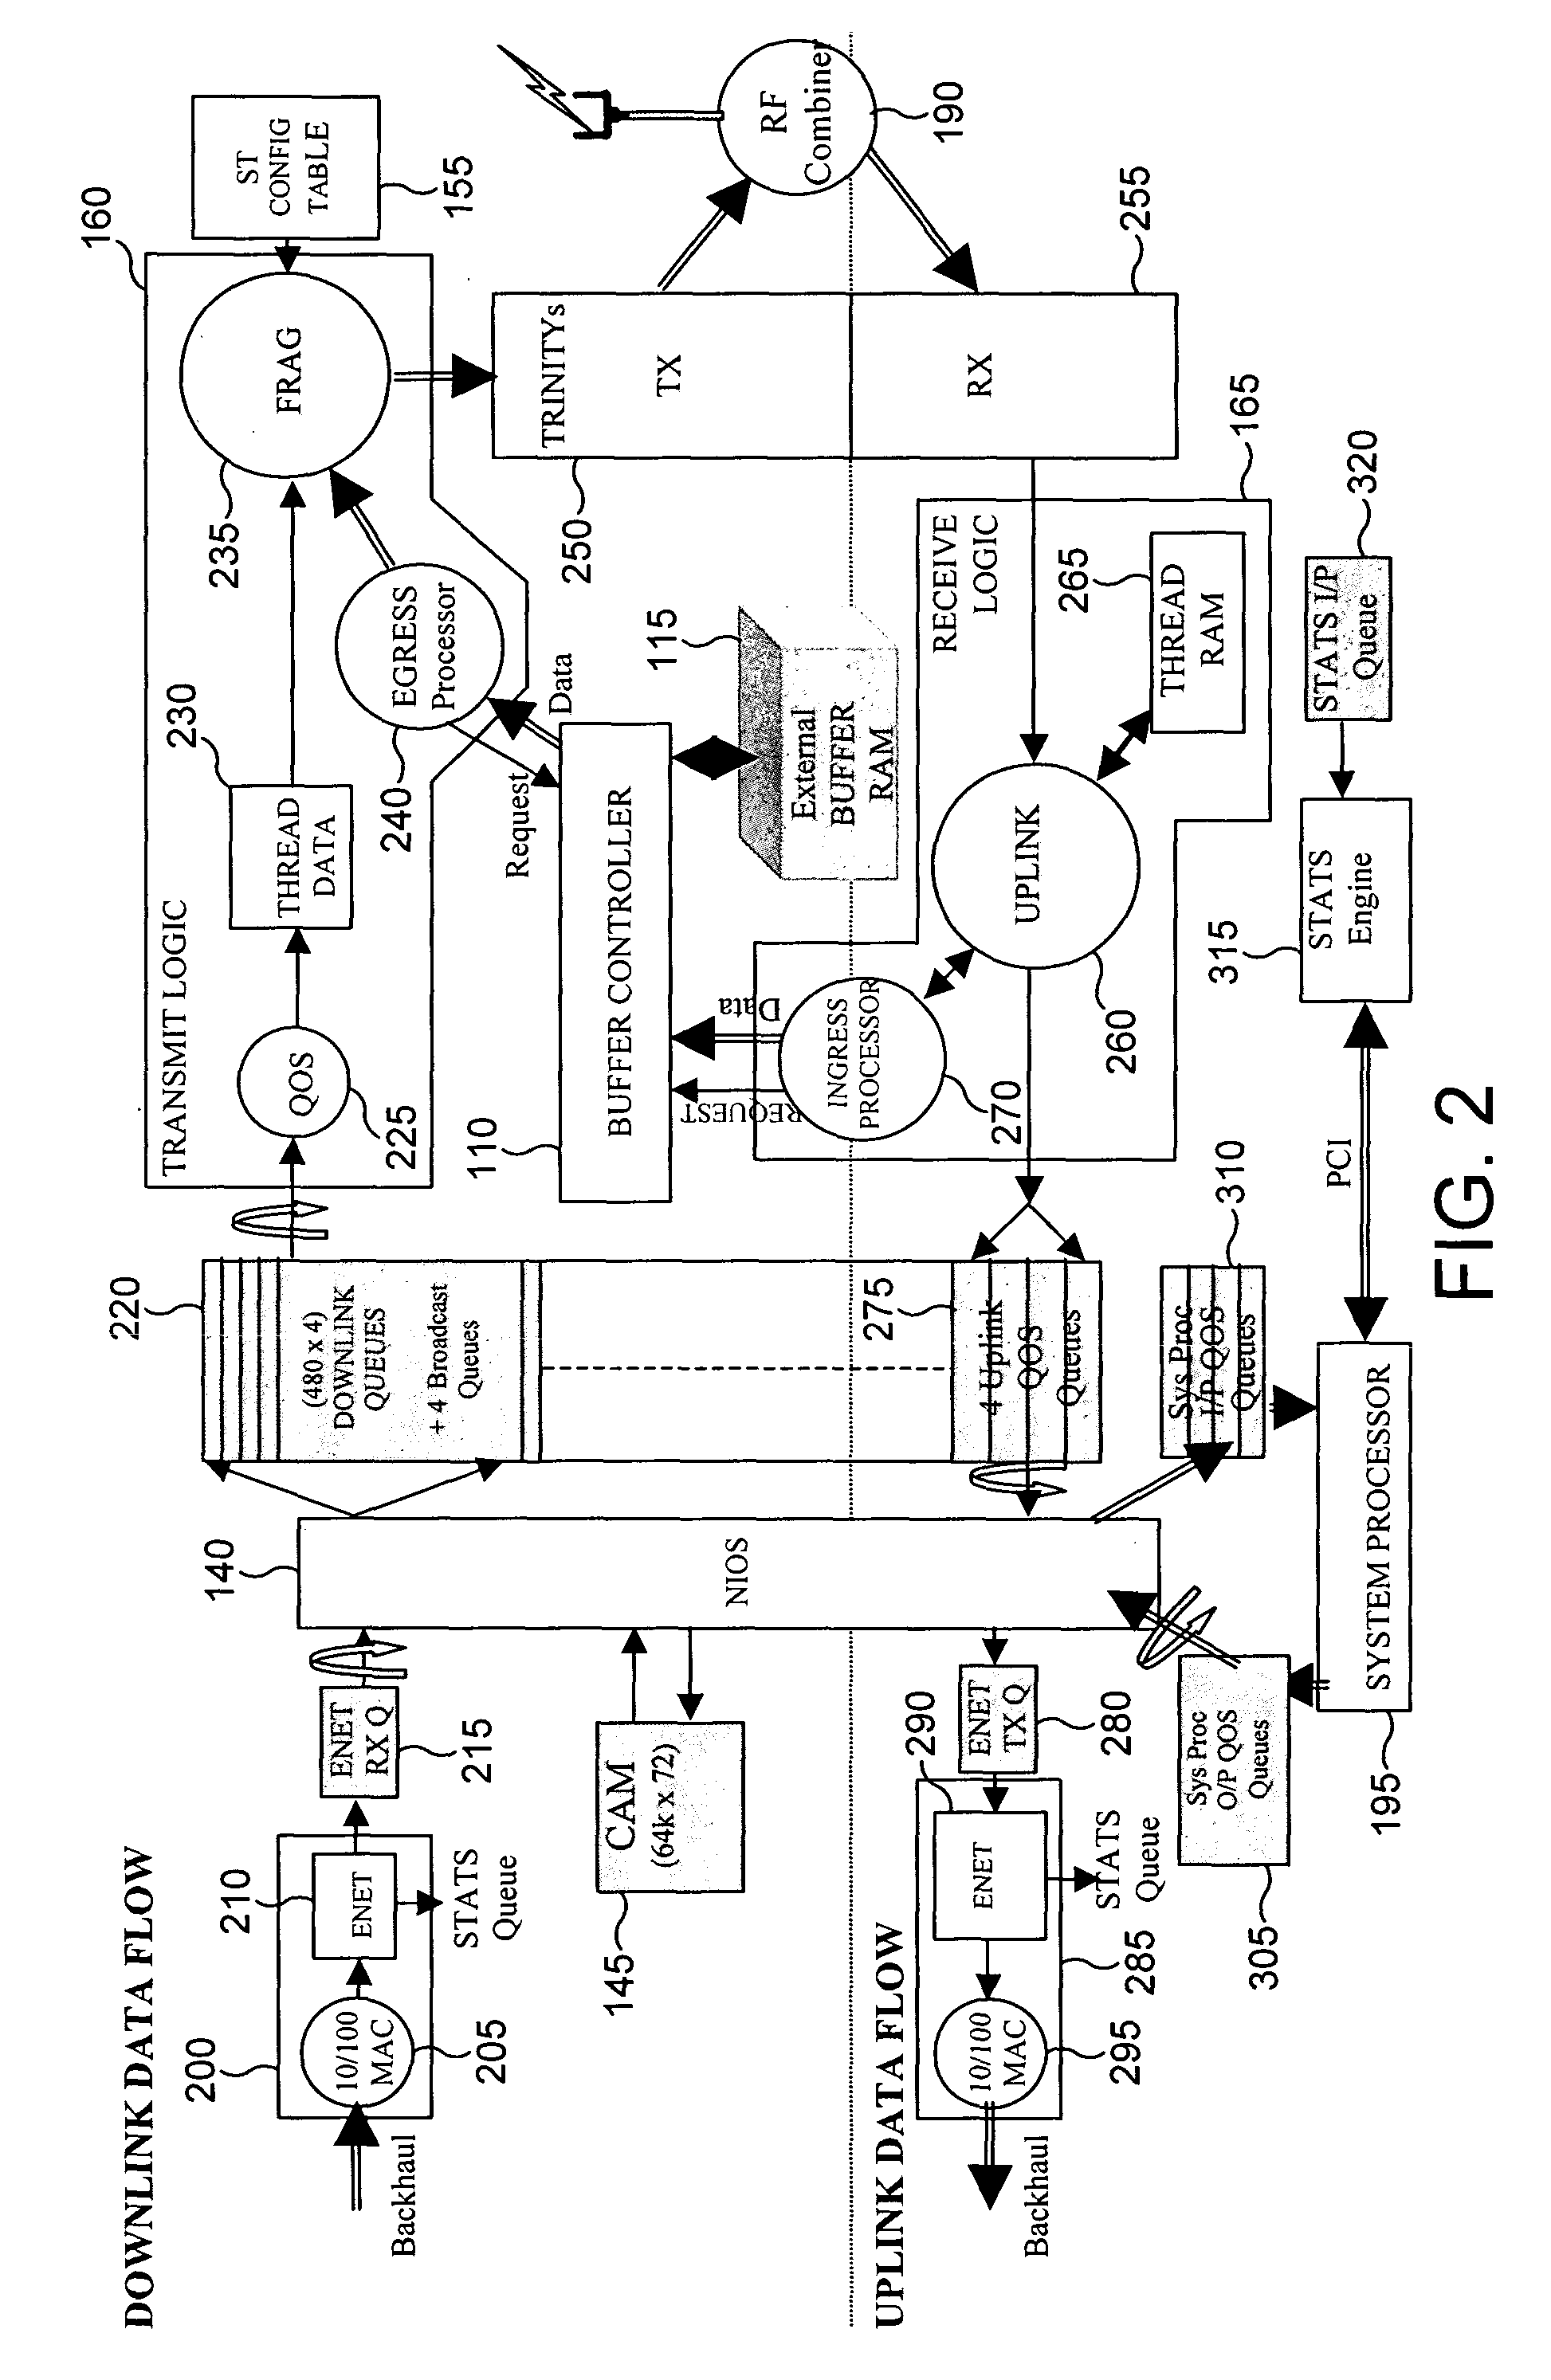 System and method for data routing